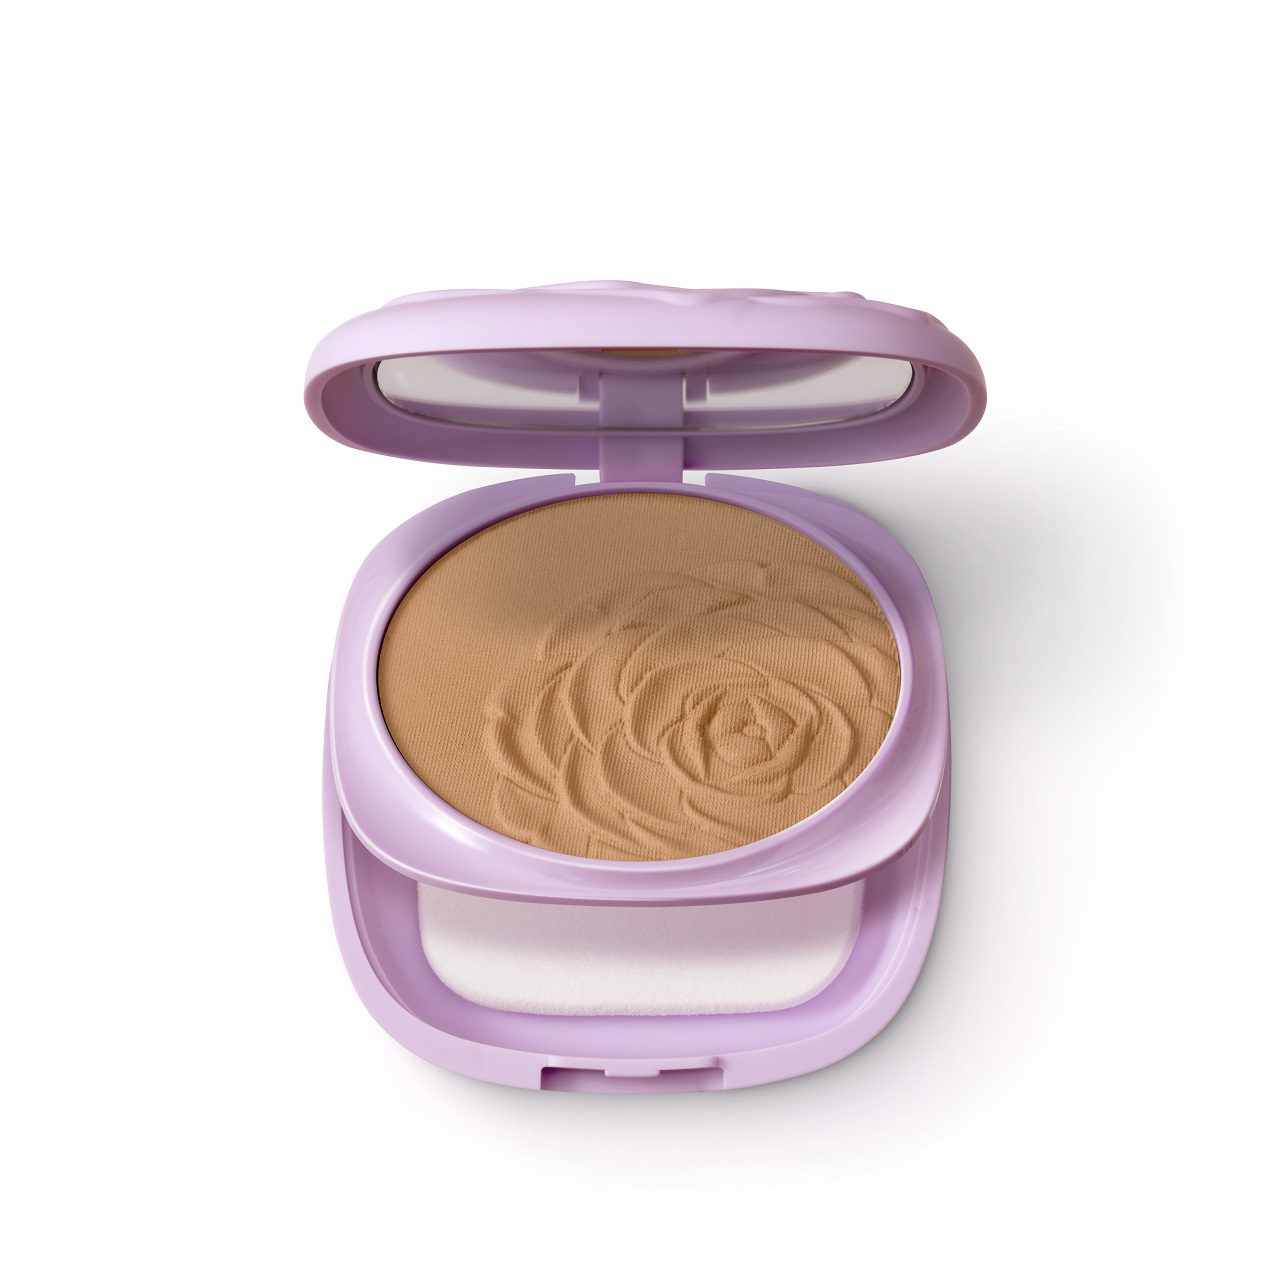 BLOSSOMING BEAUTY HYDRATING AND LONG LASTING BLURRING FOUNDATION - 06 5N CARAMEL